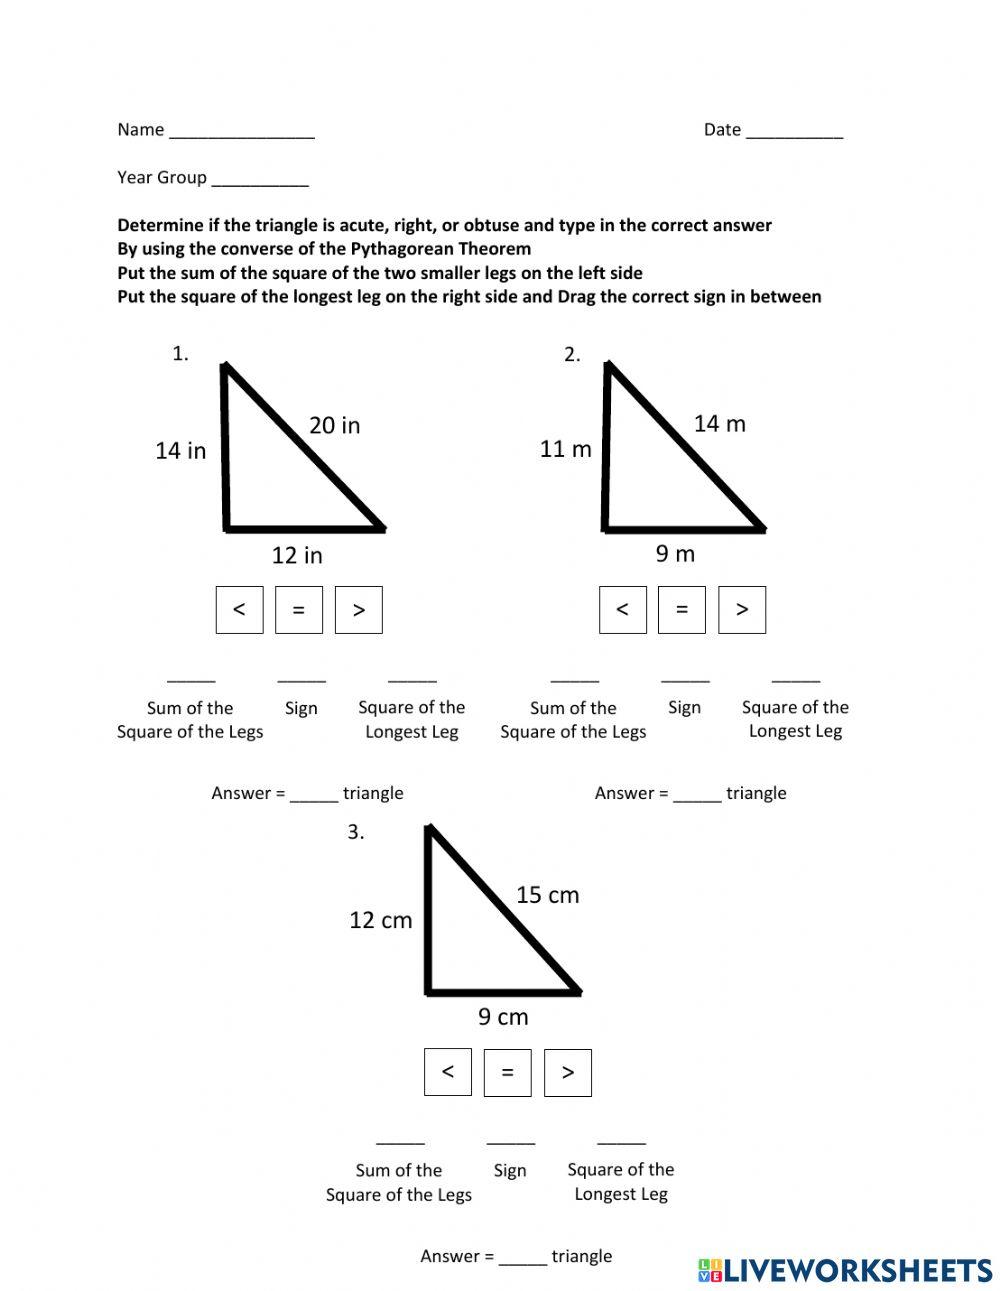 Converse of the Pythagorean Theorem - Determine if the Triangle is Acute, Right, or Obtuse